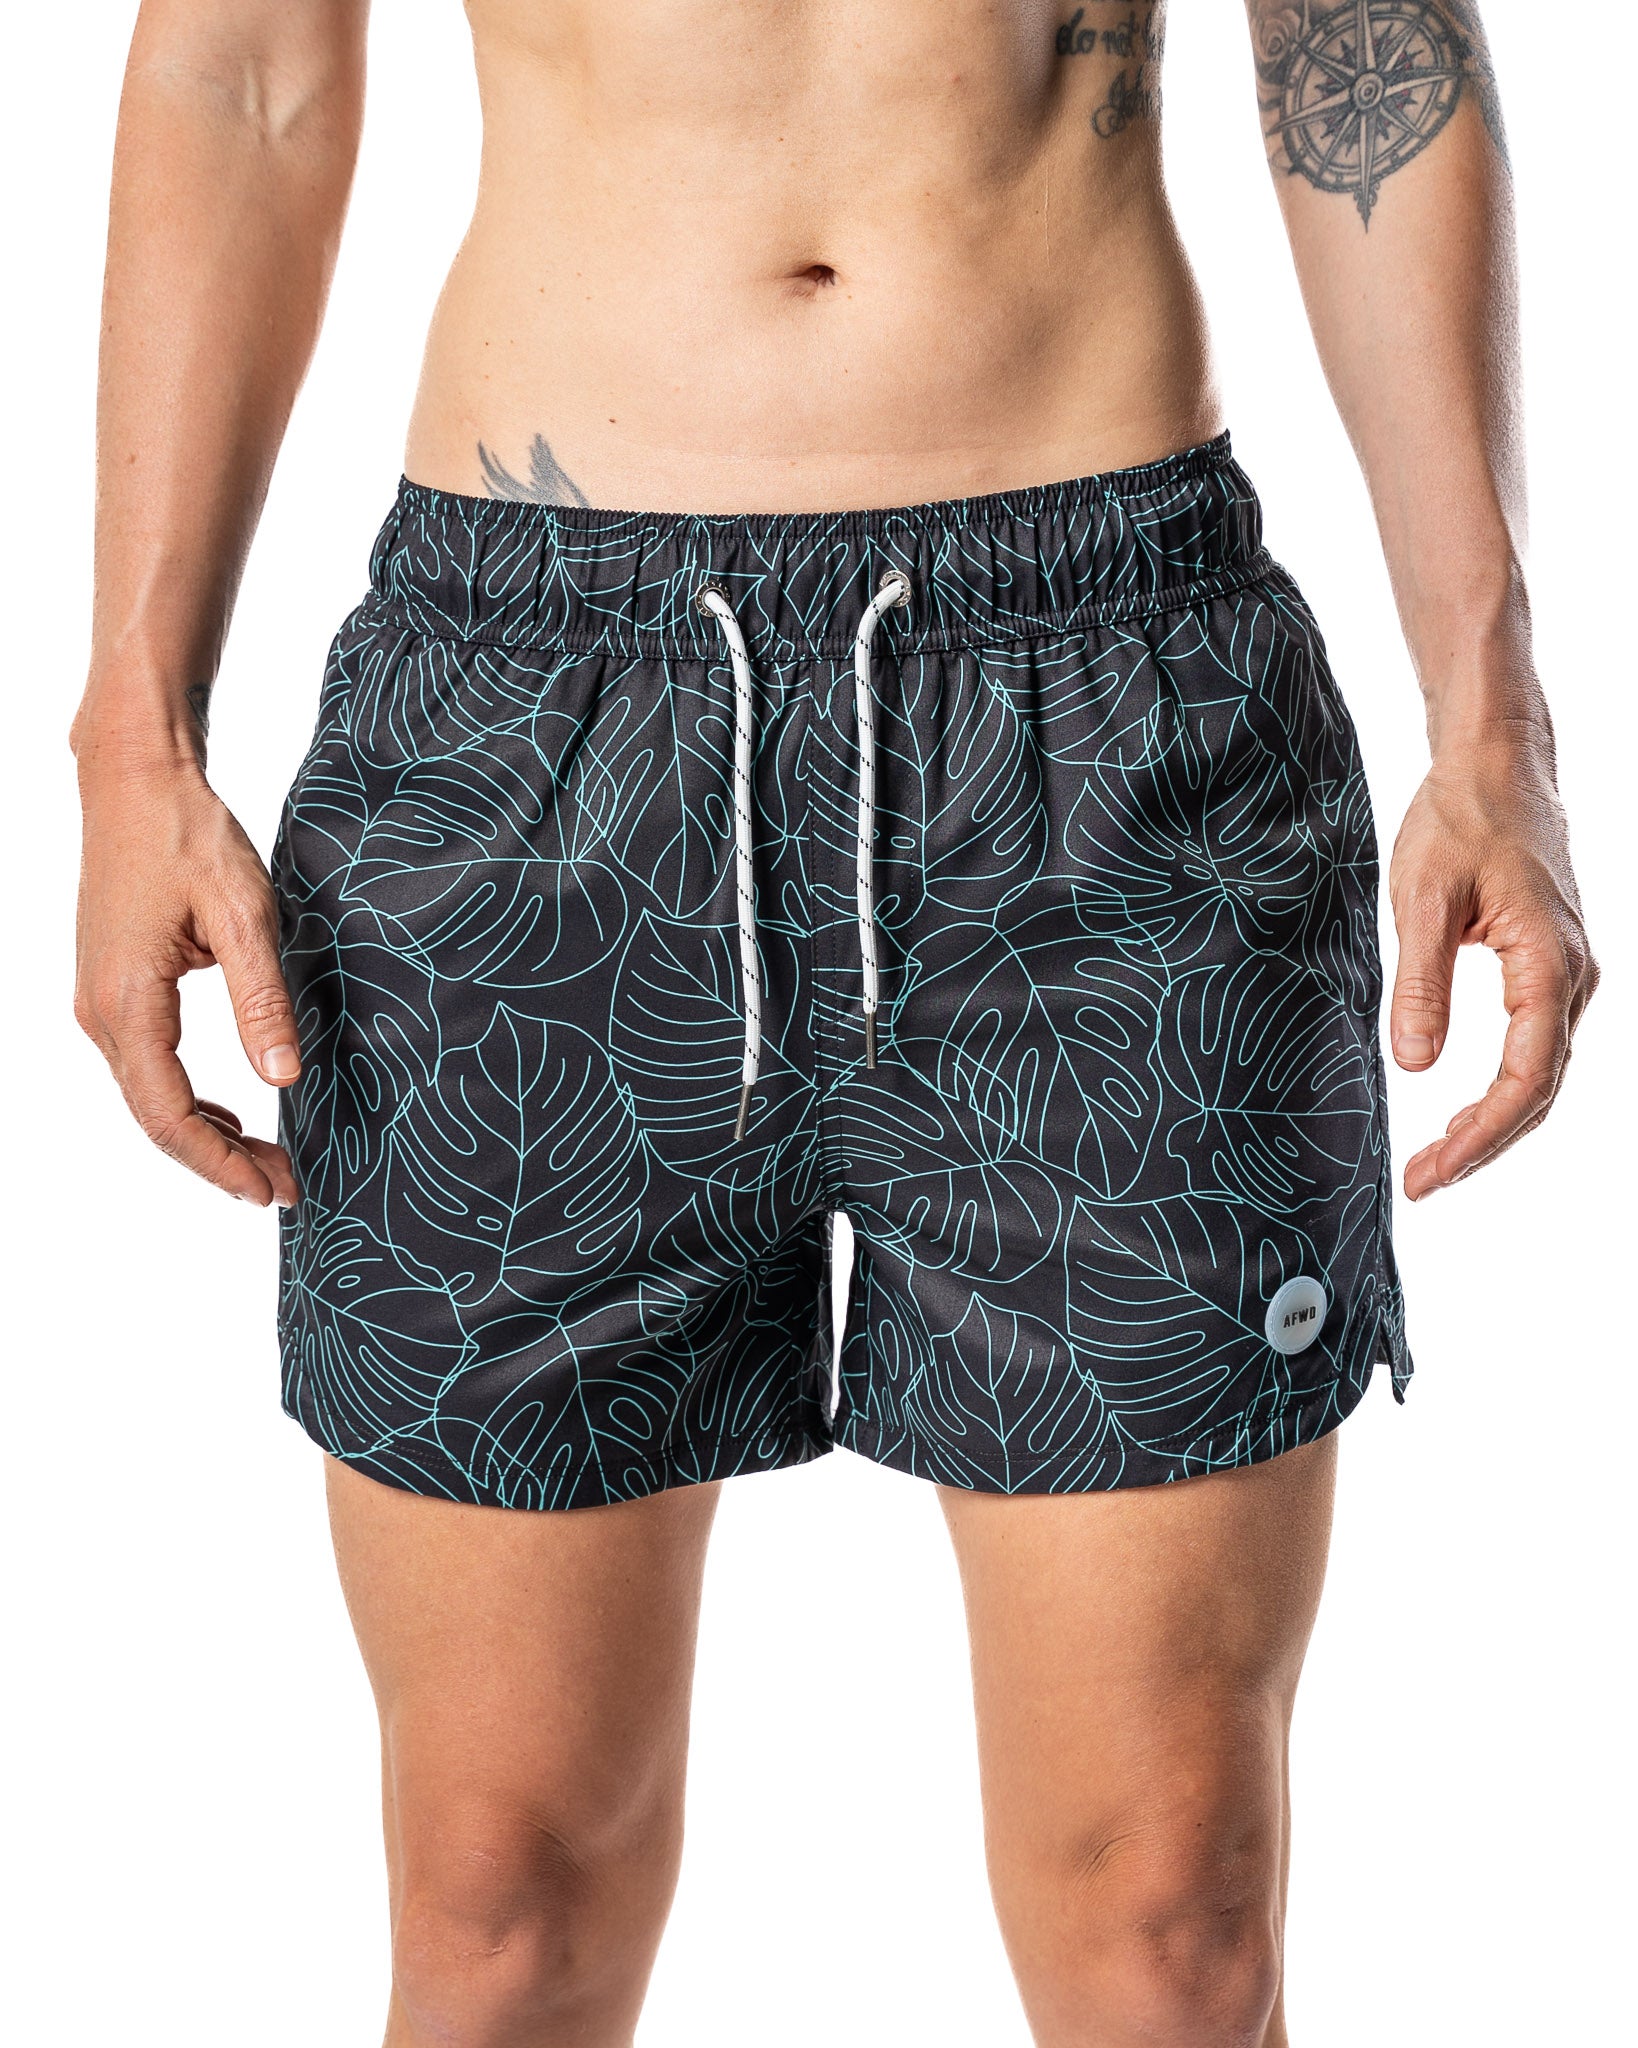 Haven Boardshort - Plant One On Me